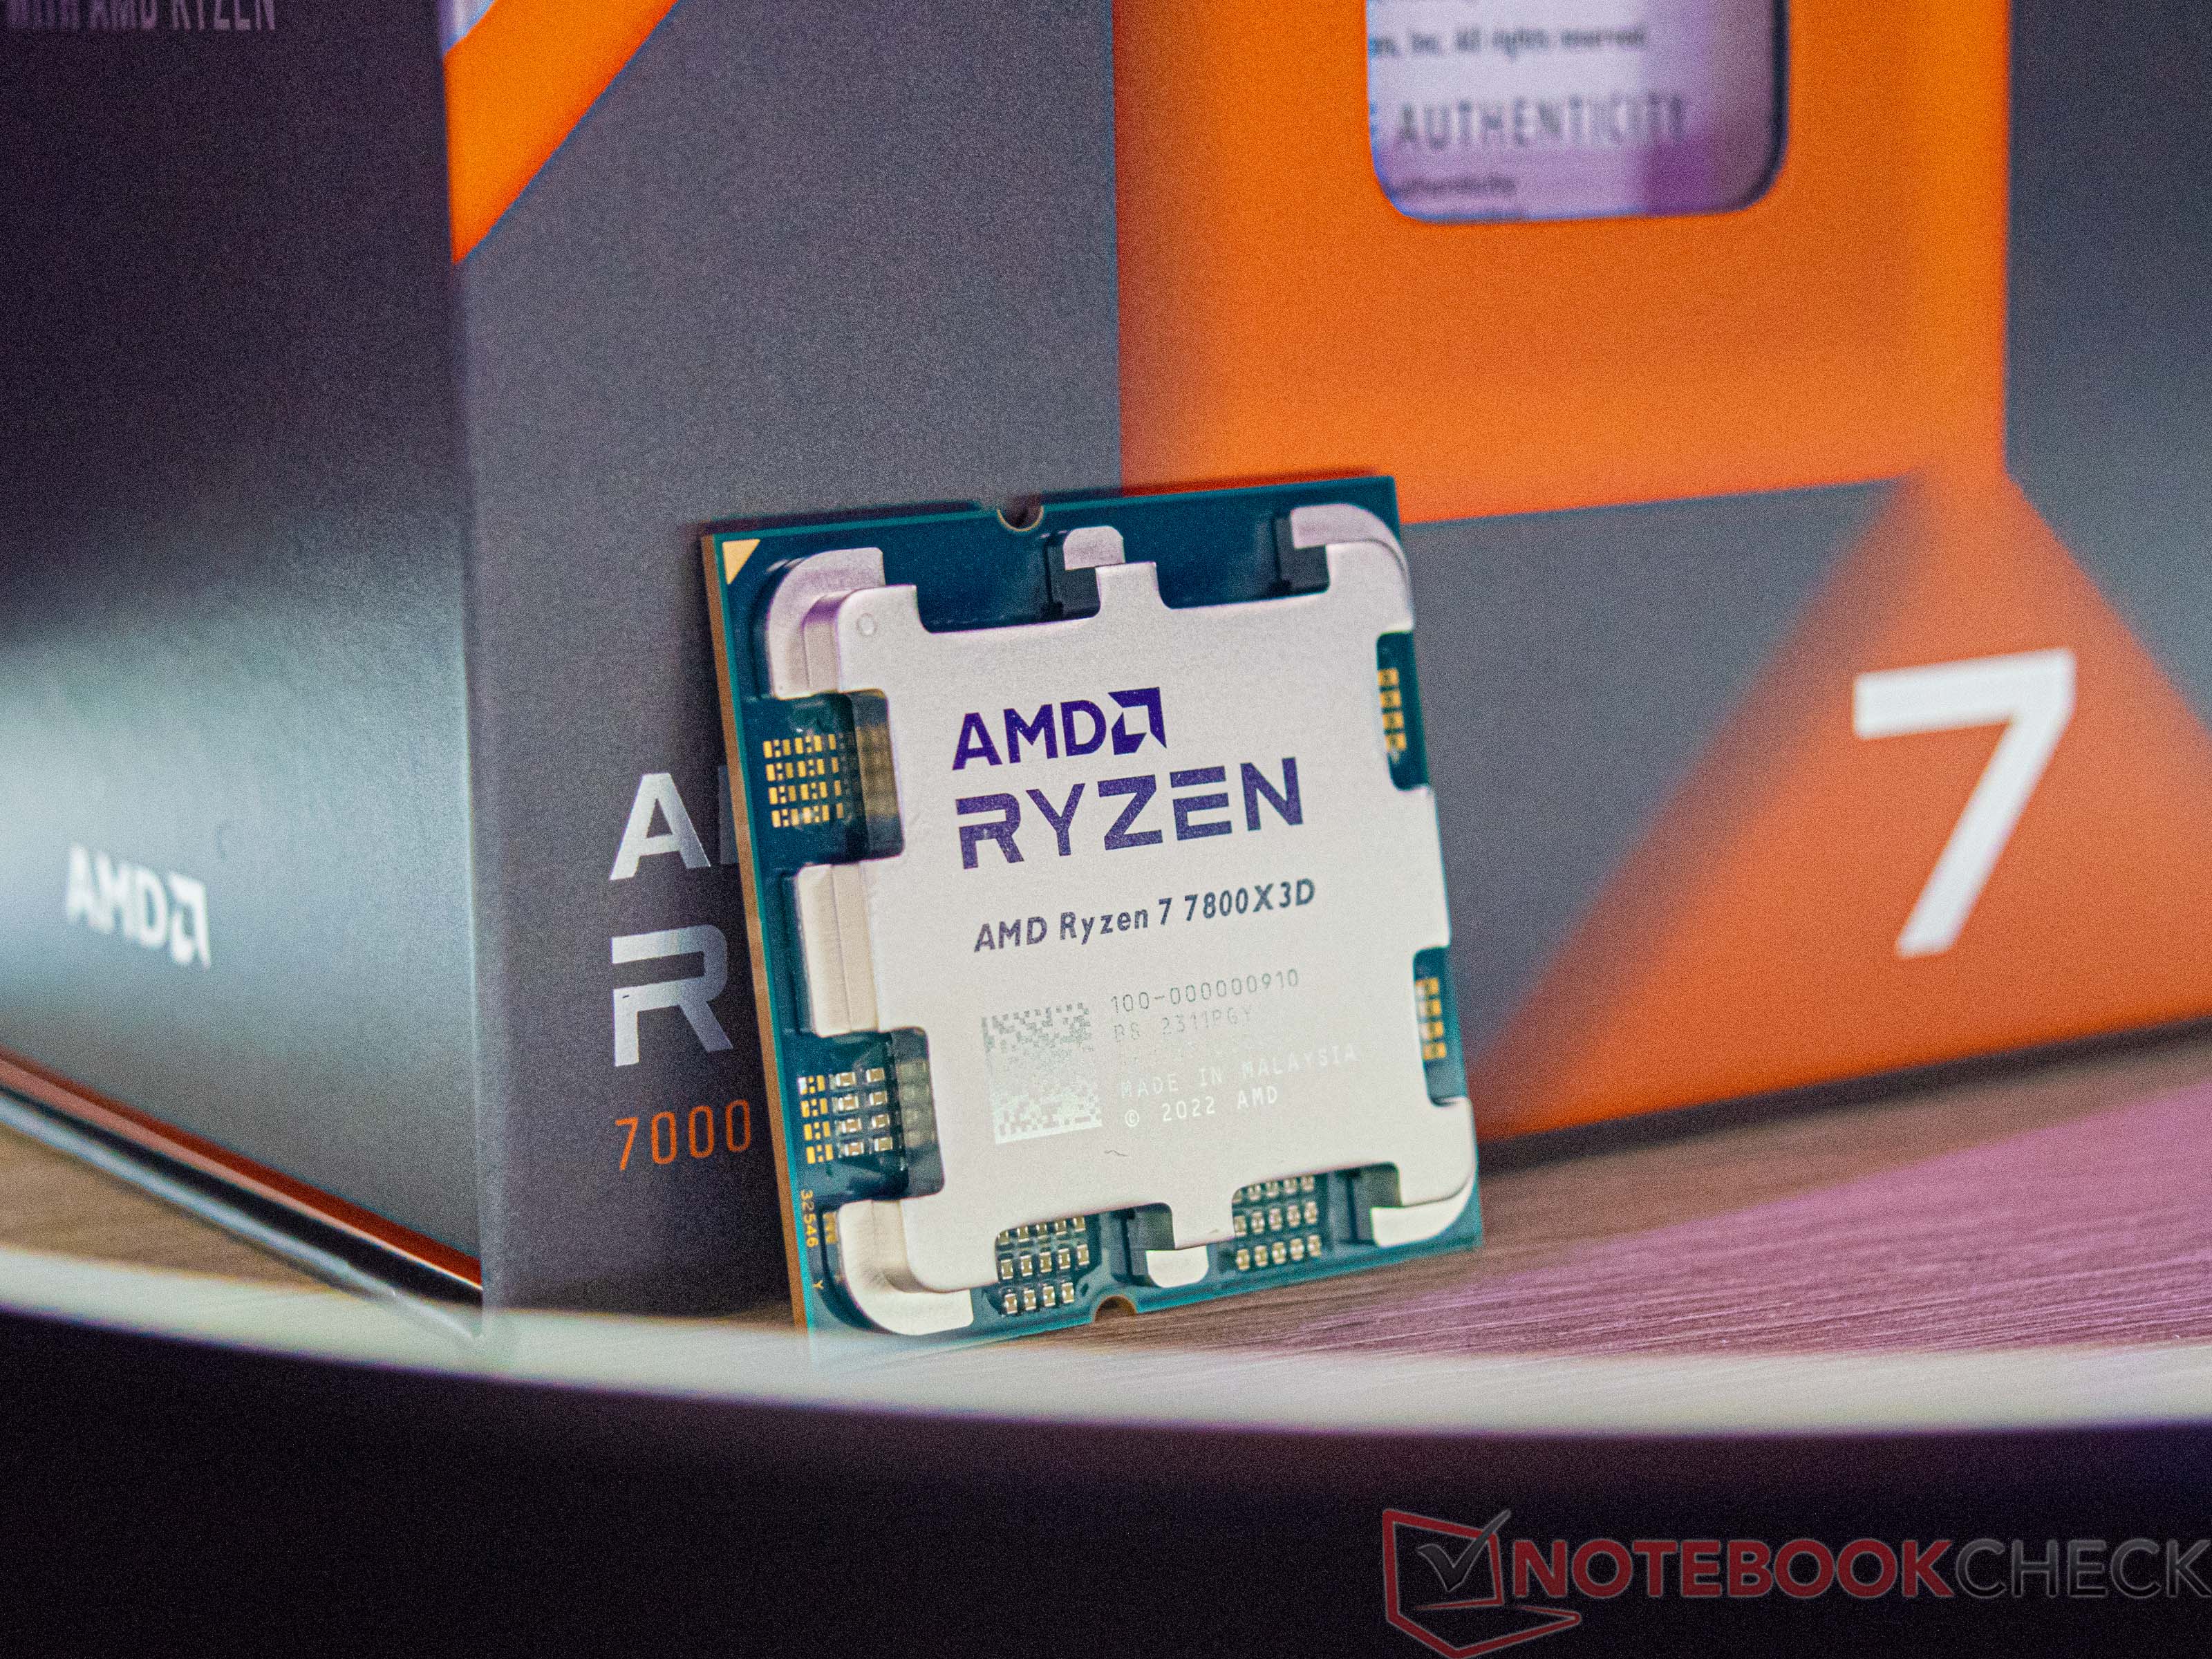 Ryzen 7 7800X3D, AMD's best gaming CPU is now available at $354 